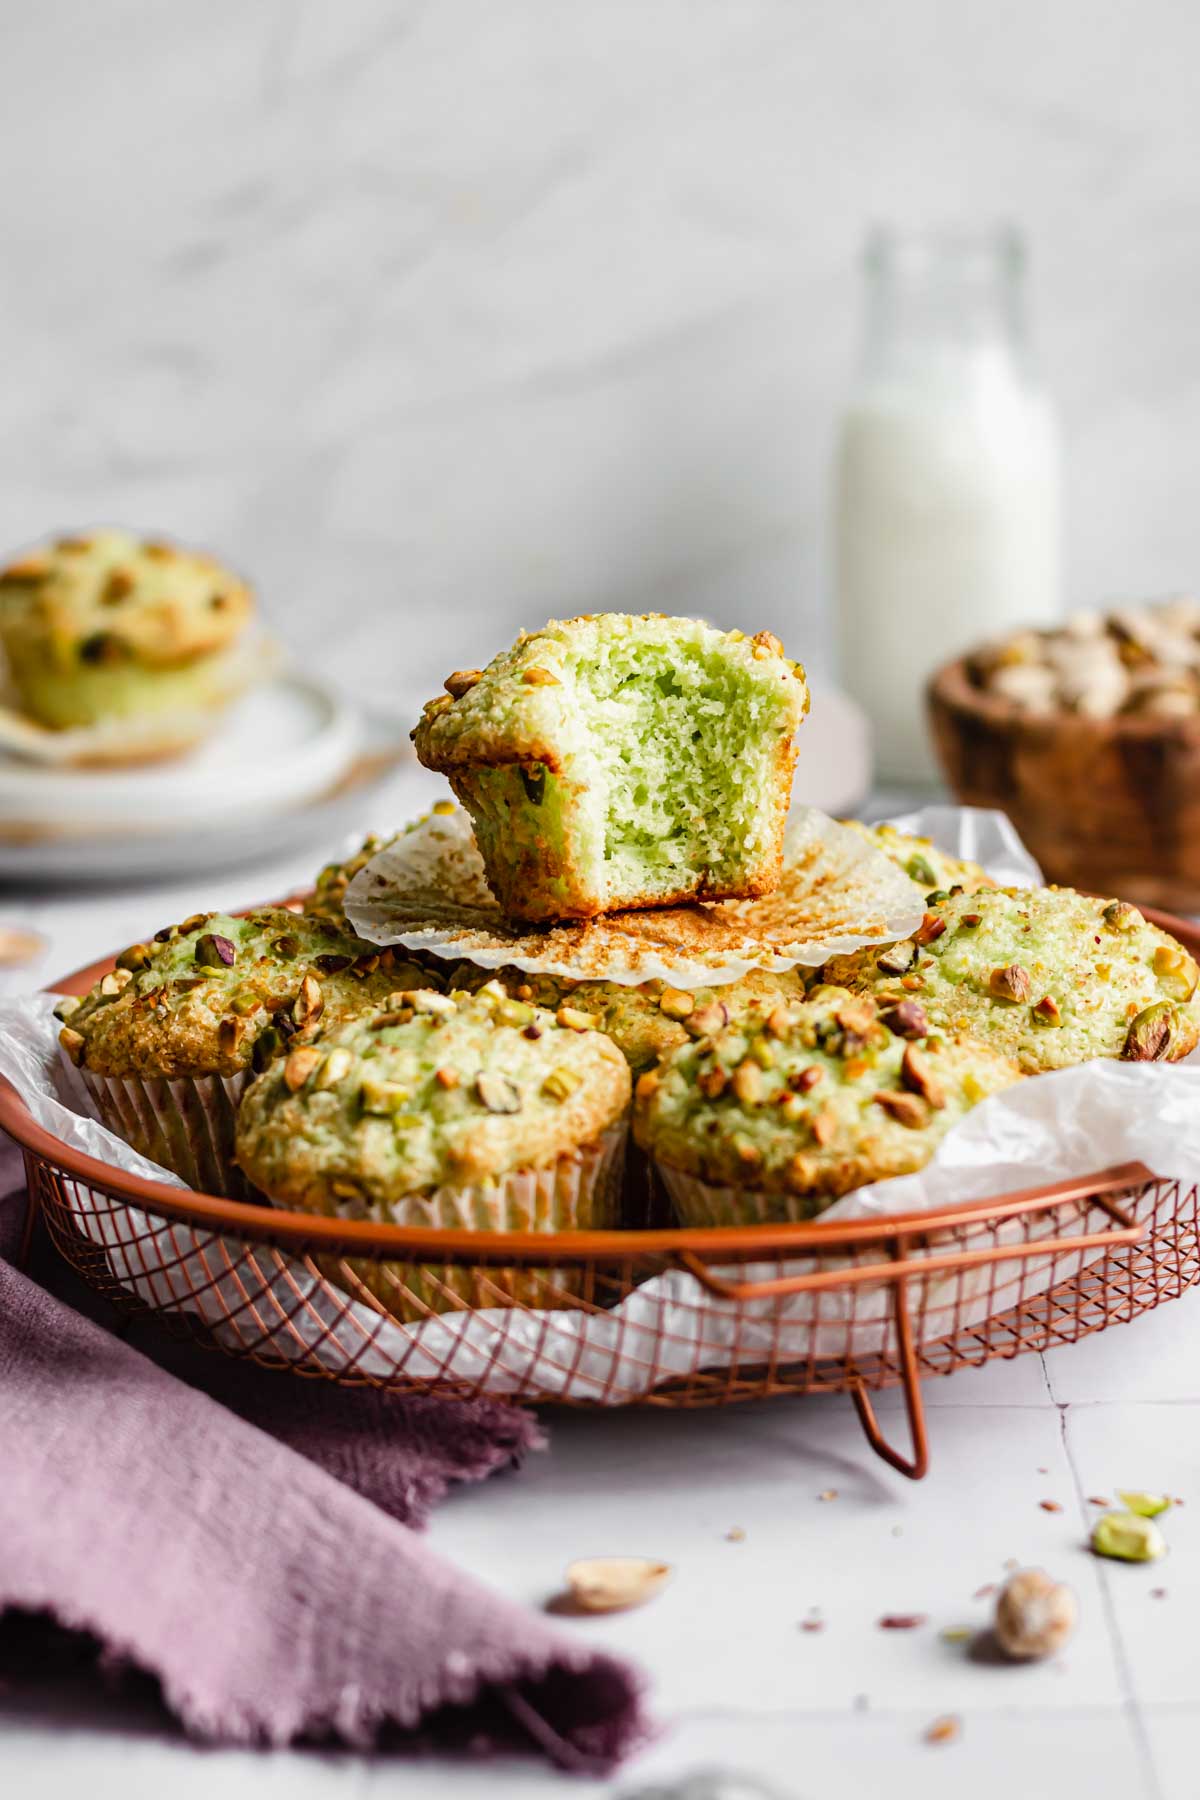 A muffin with a bite removed sits on top of a basket of pistachio muffins.